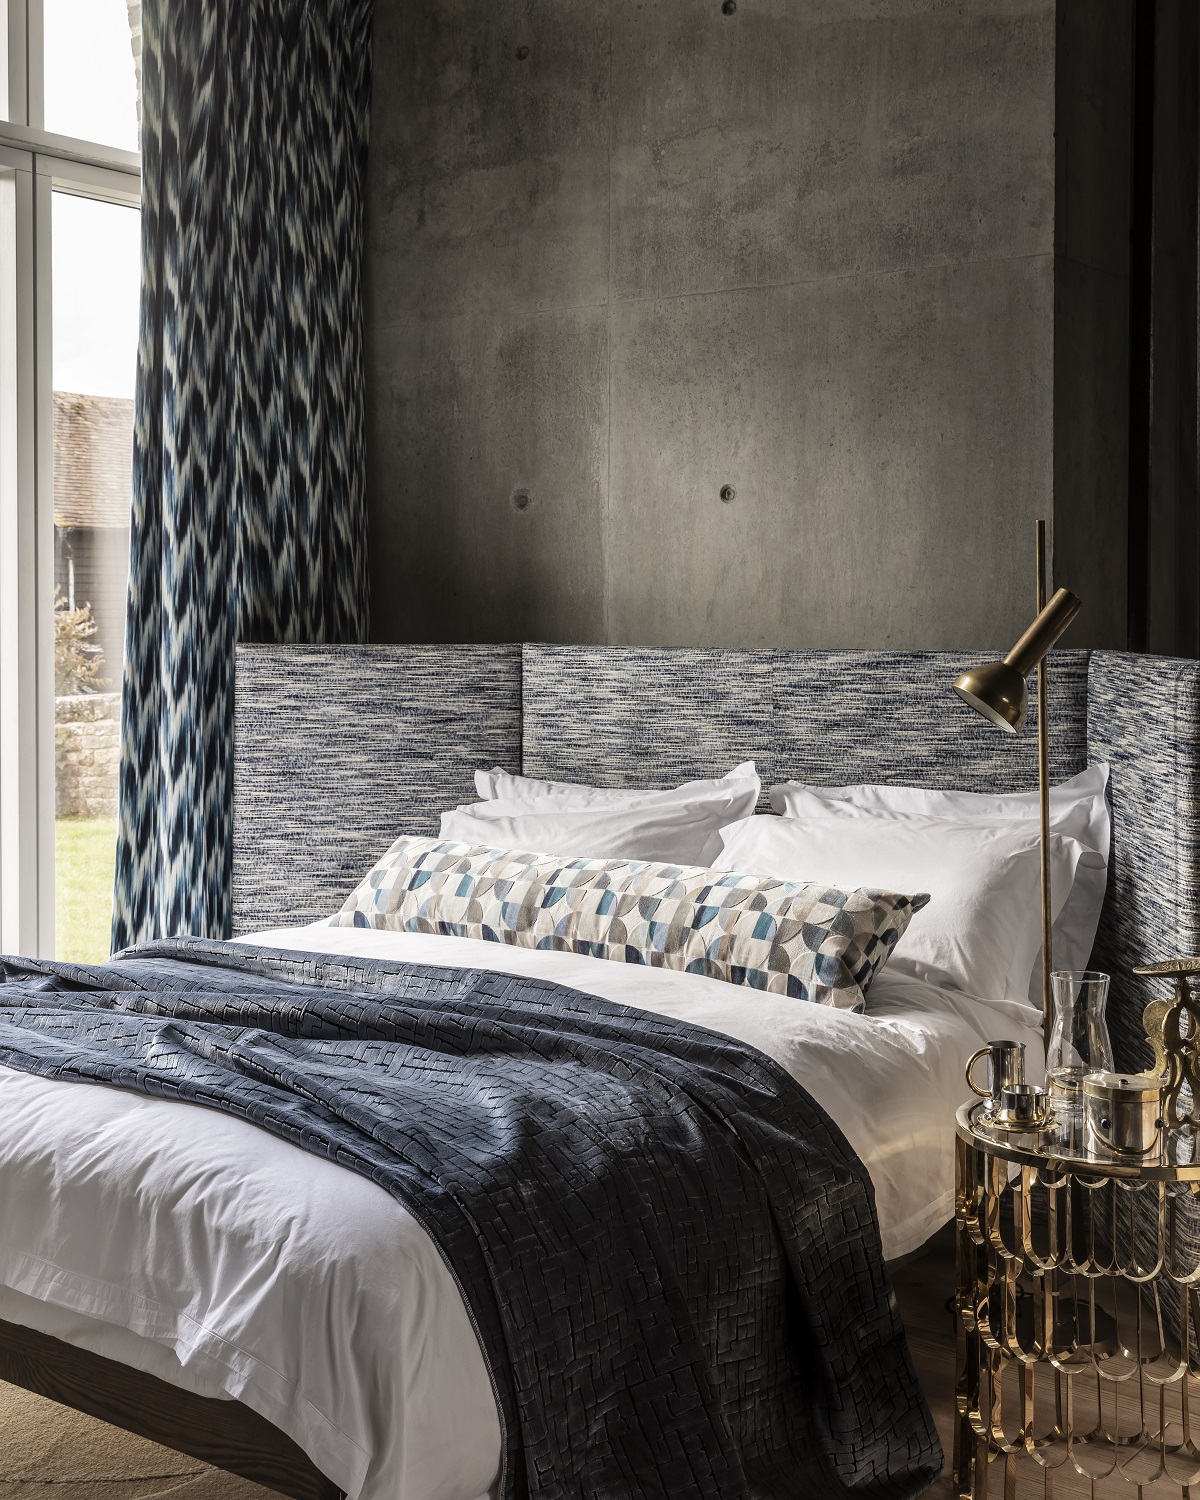 screen shaped headboard against a grey concrete wall with a mix of patterns and fabric on the bed